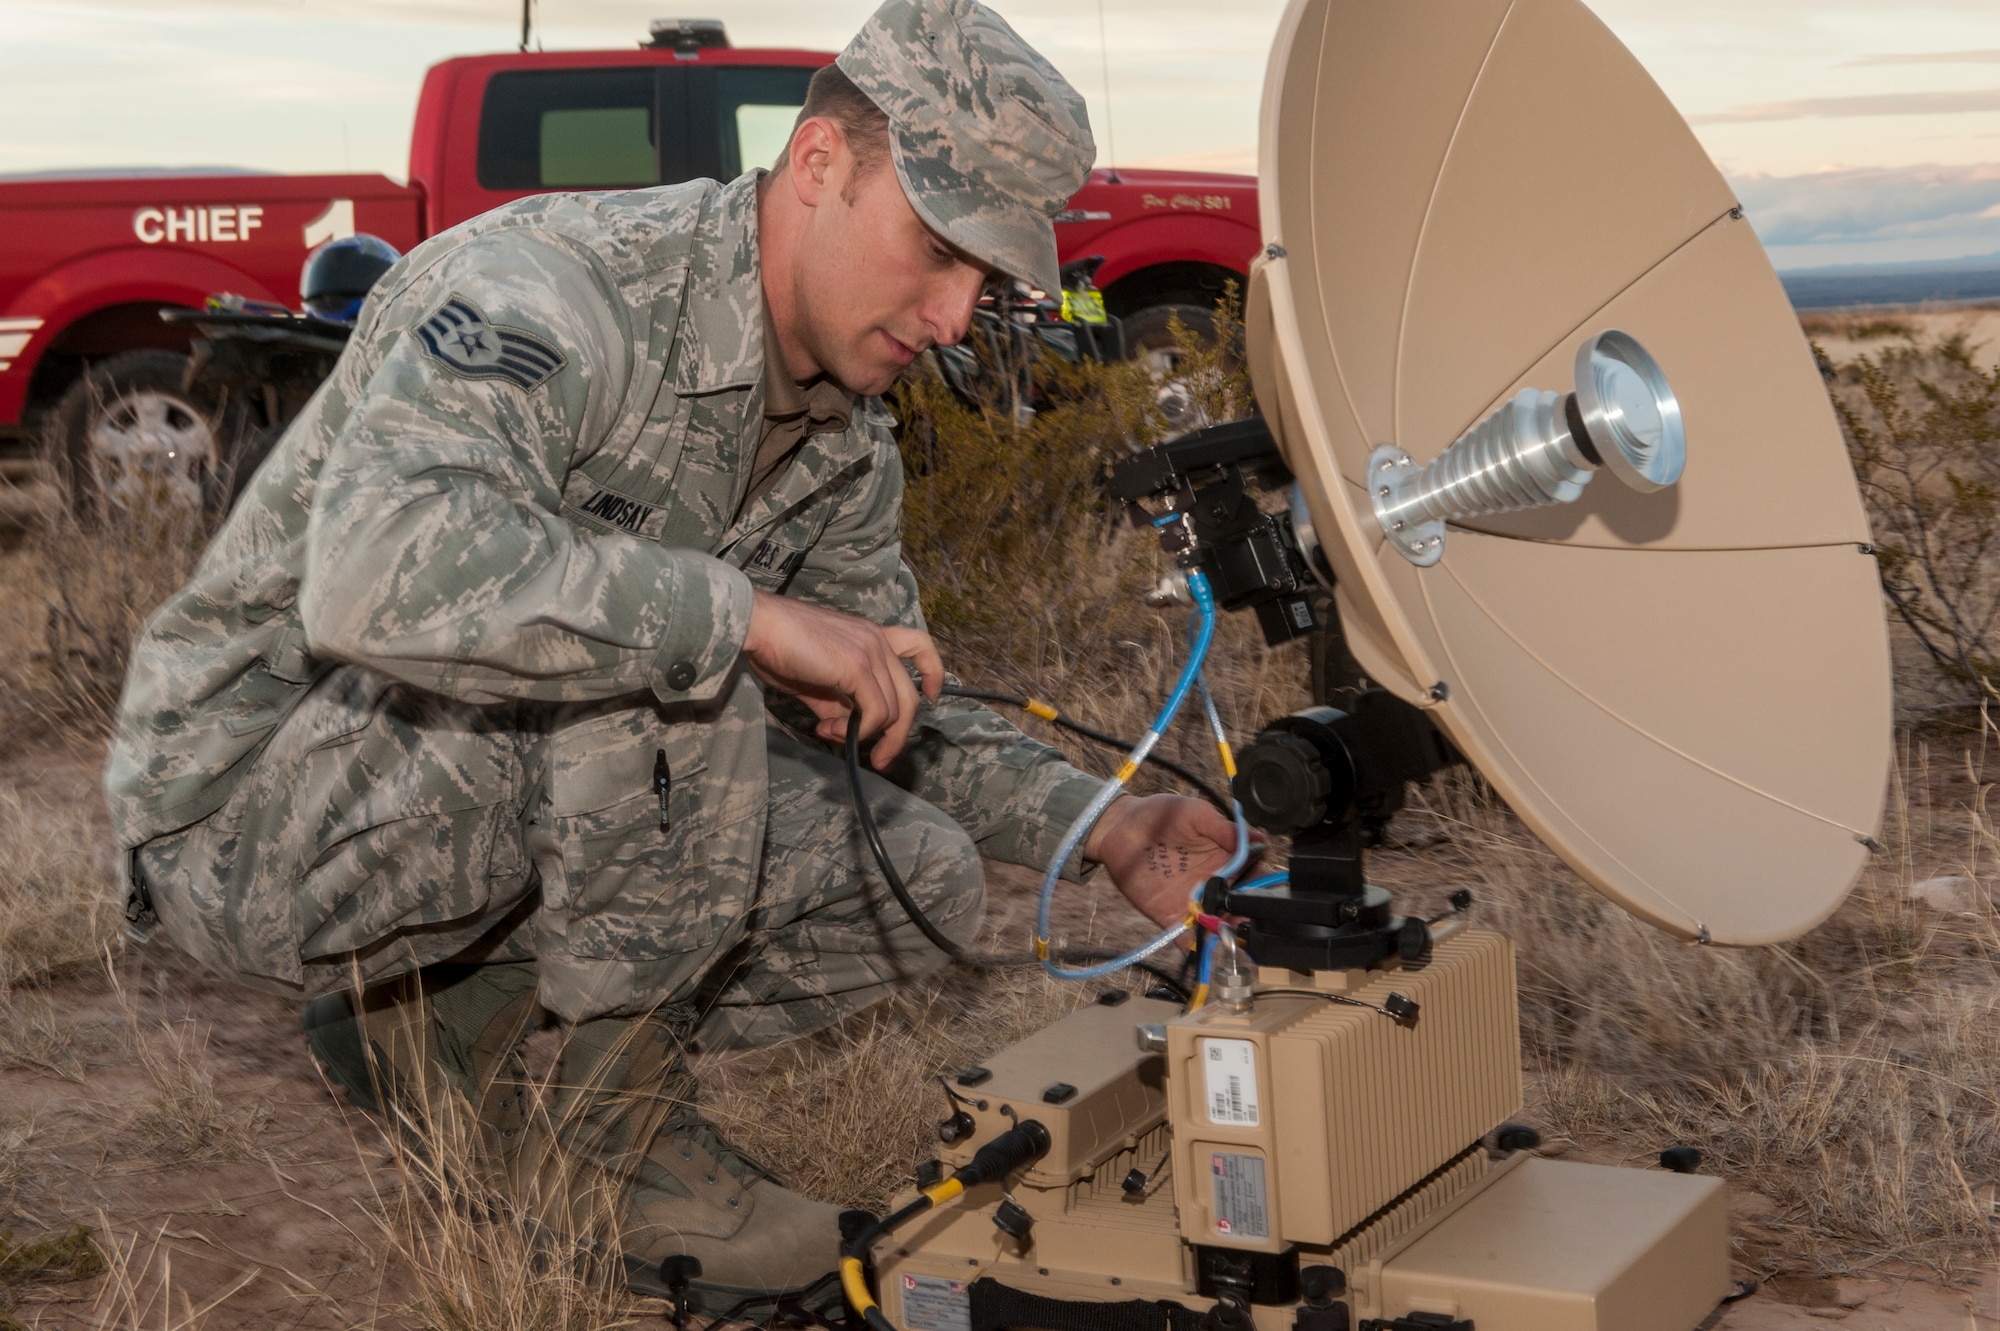 Staff Sgt. Michael Lindsay, a Hammer Adaptive Communication Element operator, disassembles a Panther terminal outside an F-16 crash site northwest of Salinas Peak, New Mexico on Nov. 26. Hammer A.C.E. operatives provide strategic communications for emergencies, both military and humanitarian, worldwide at any time. (U.S. Air Force photo by Airman 1st Class Randahl J. Jenson) 